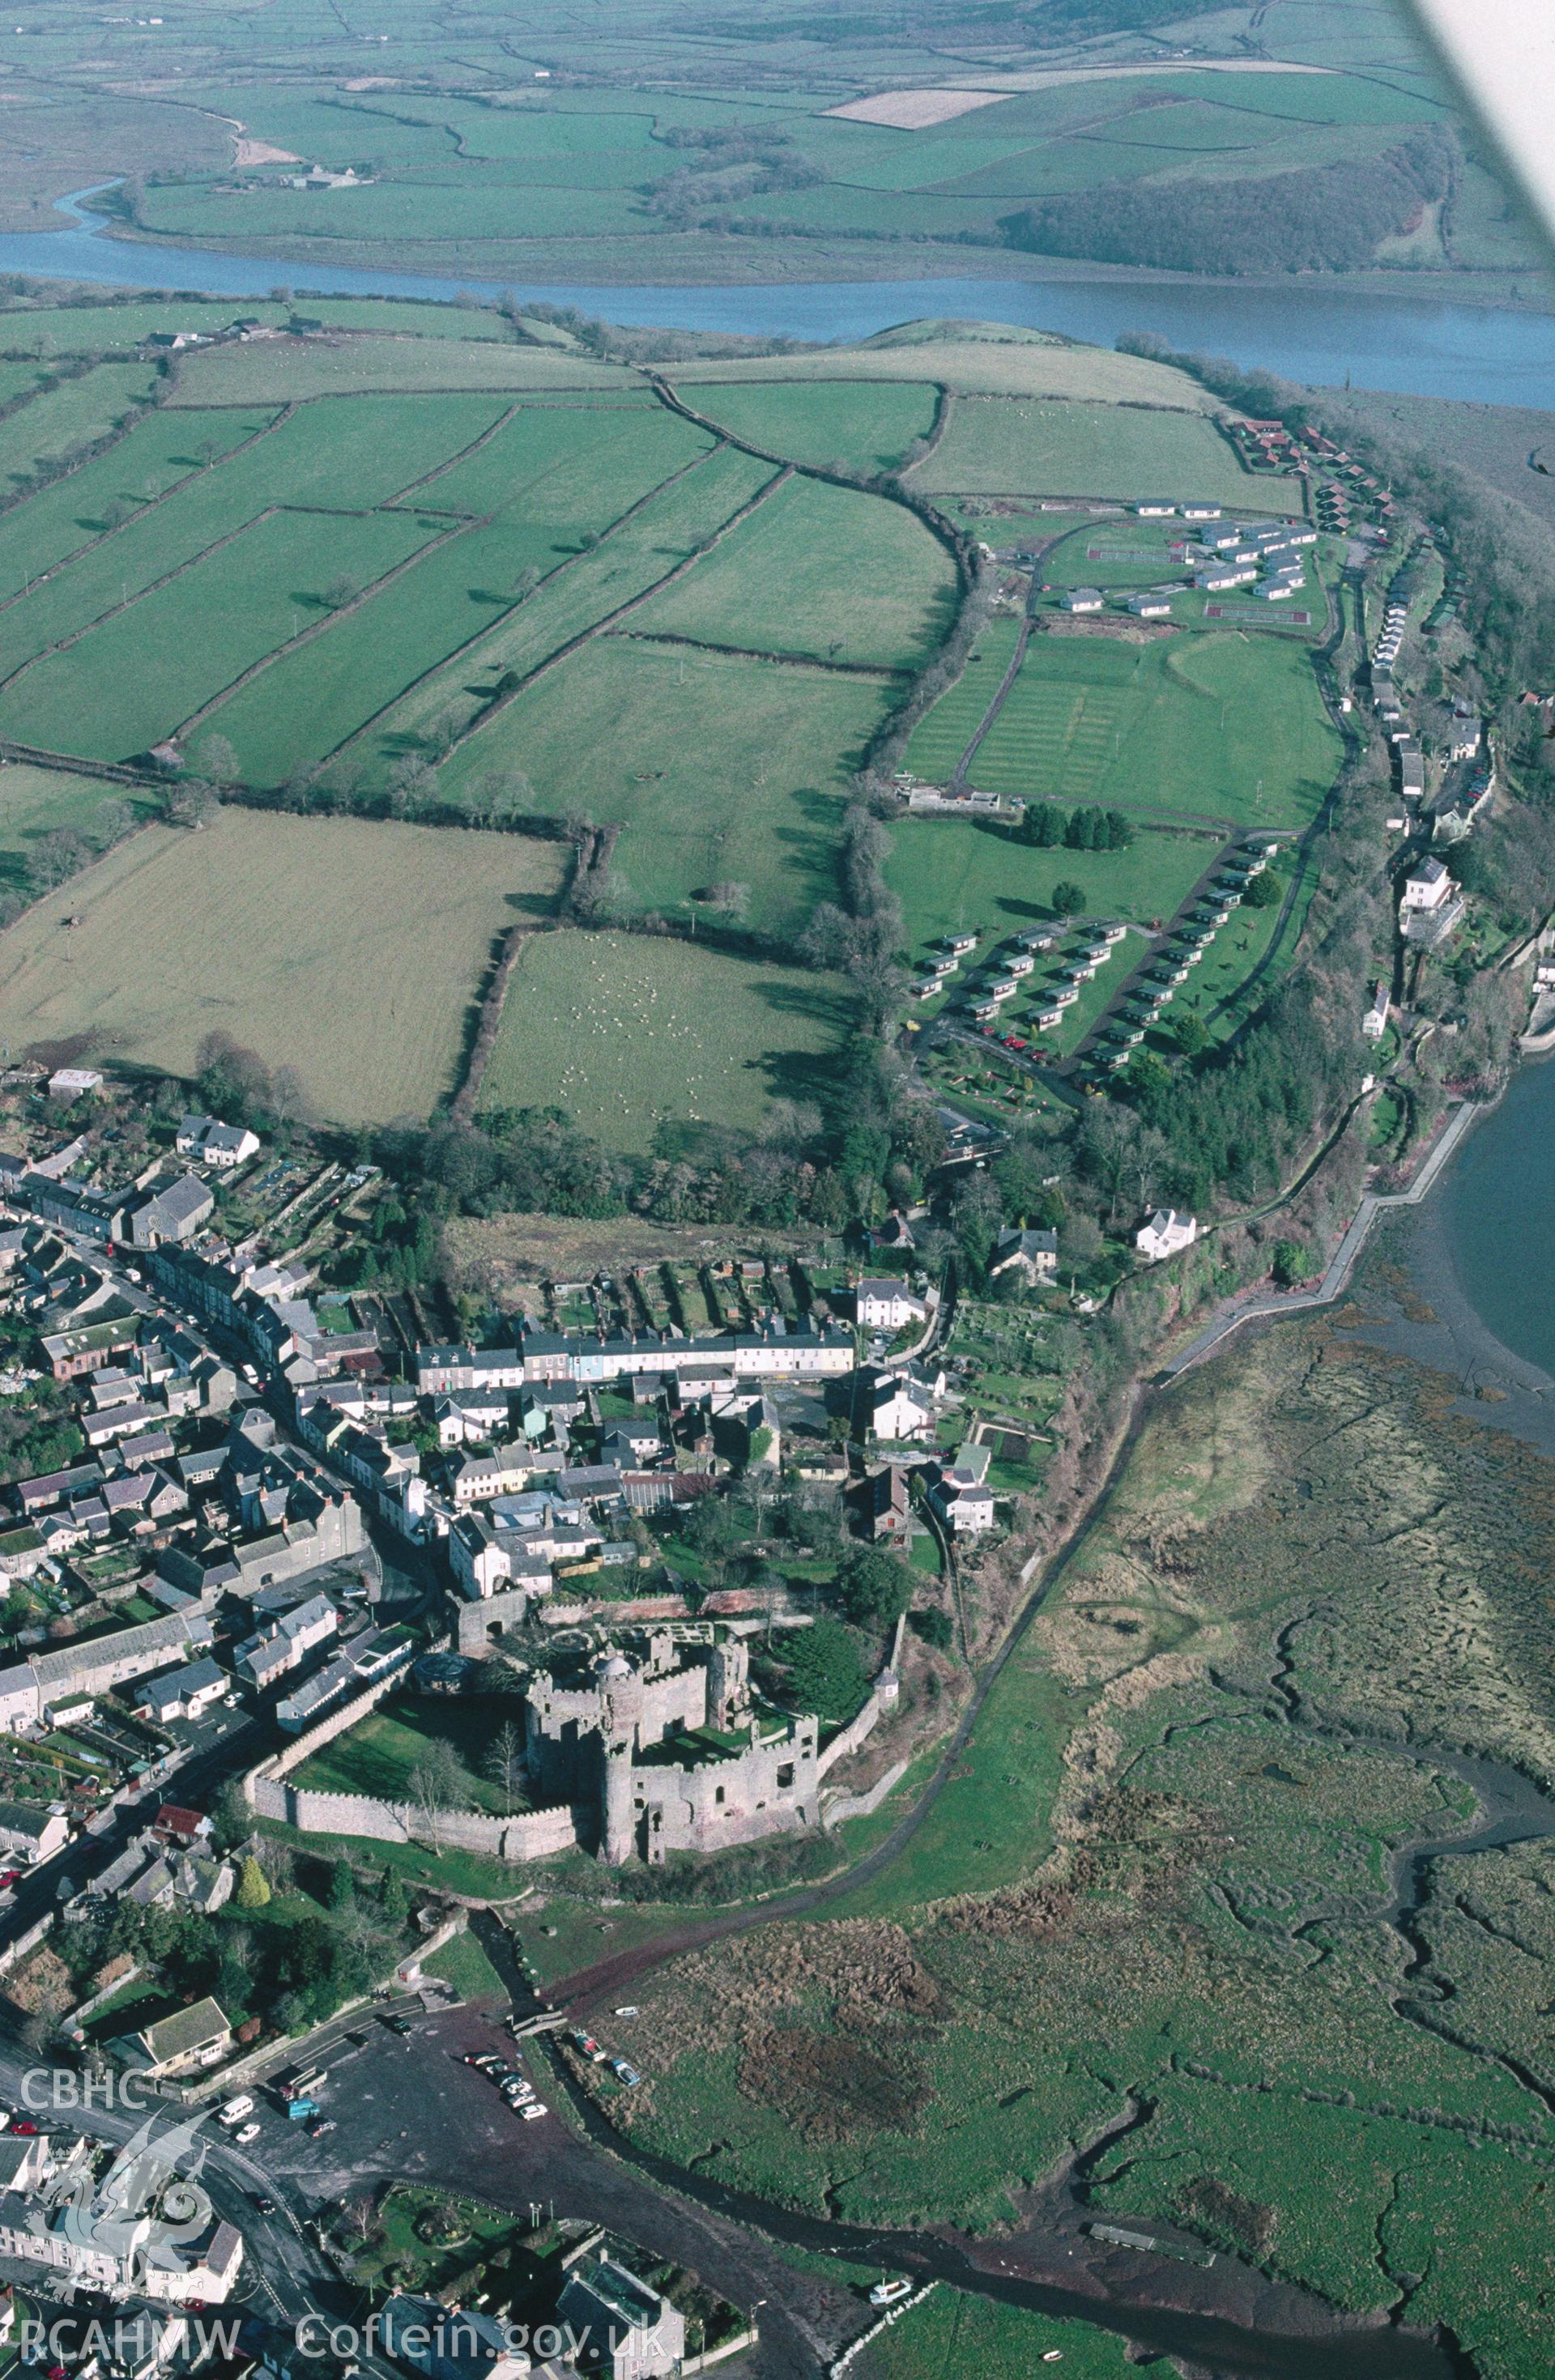 Slide of RCAHMW colour oblique aerial photograph of Laugharne, taken by C.R. Musson, 15/2/1997.